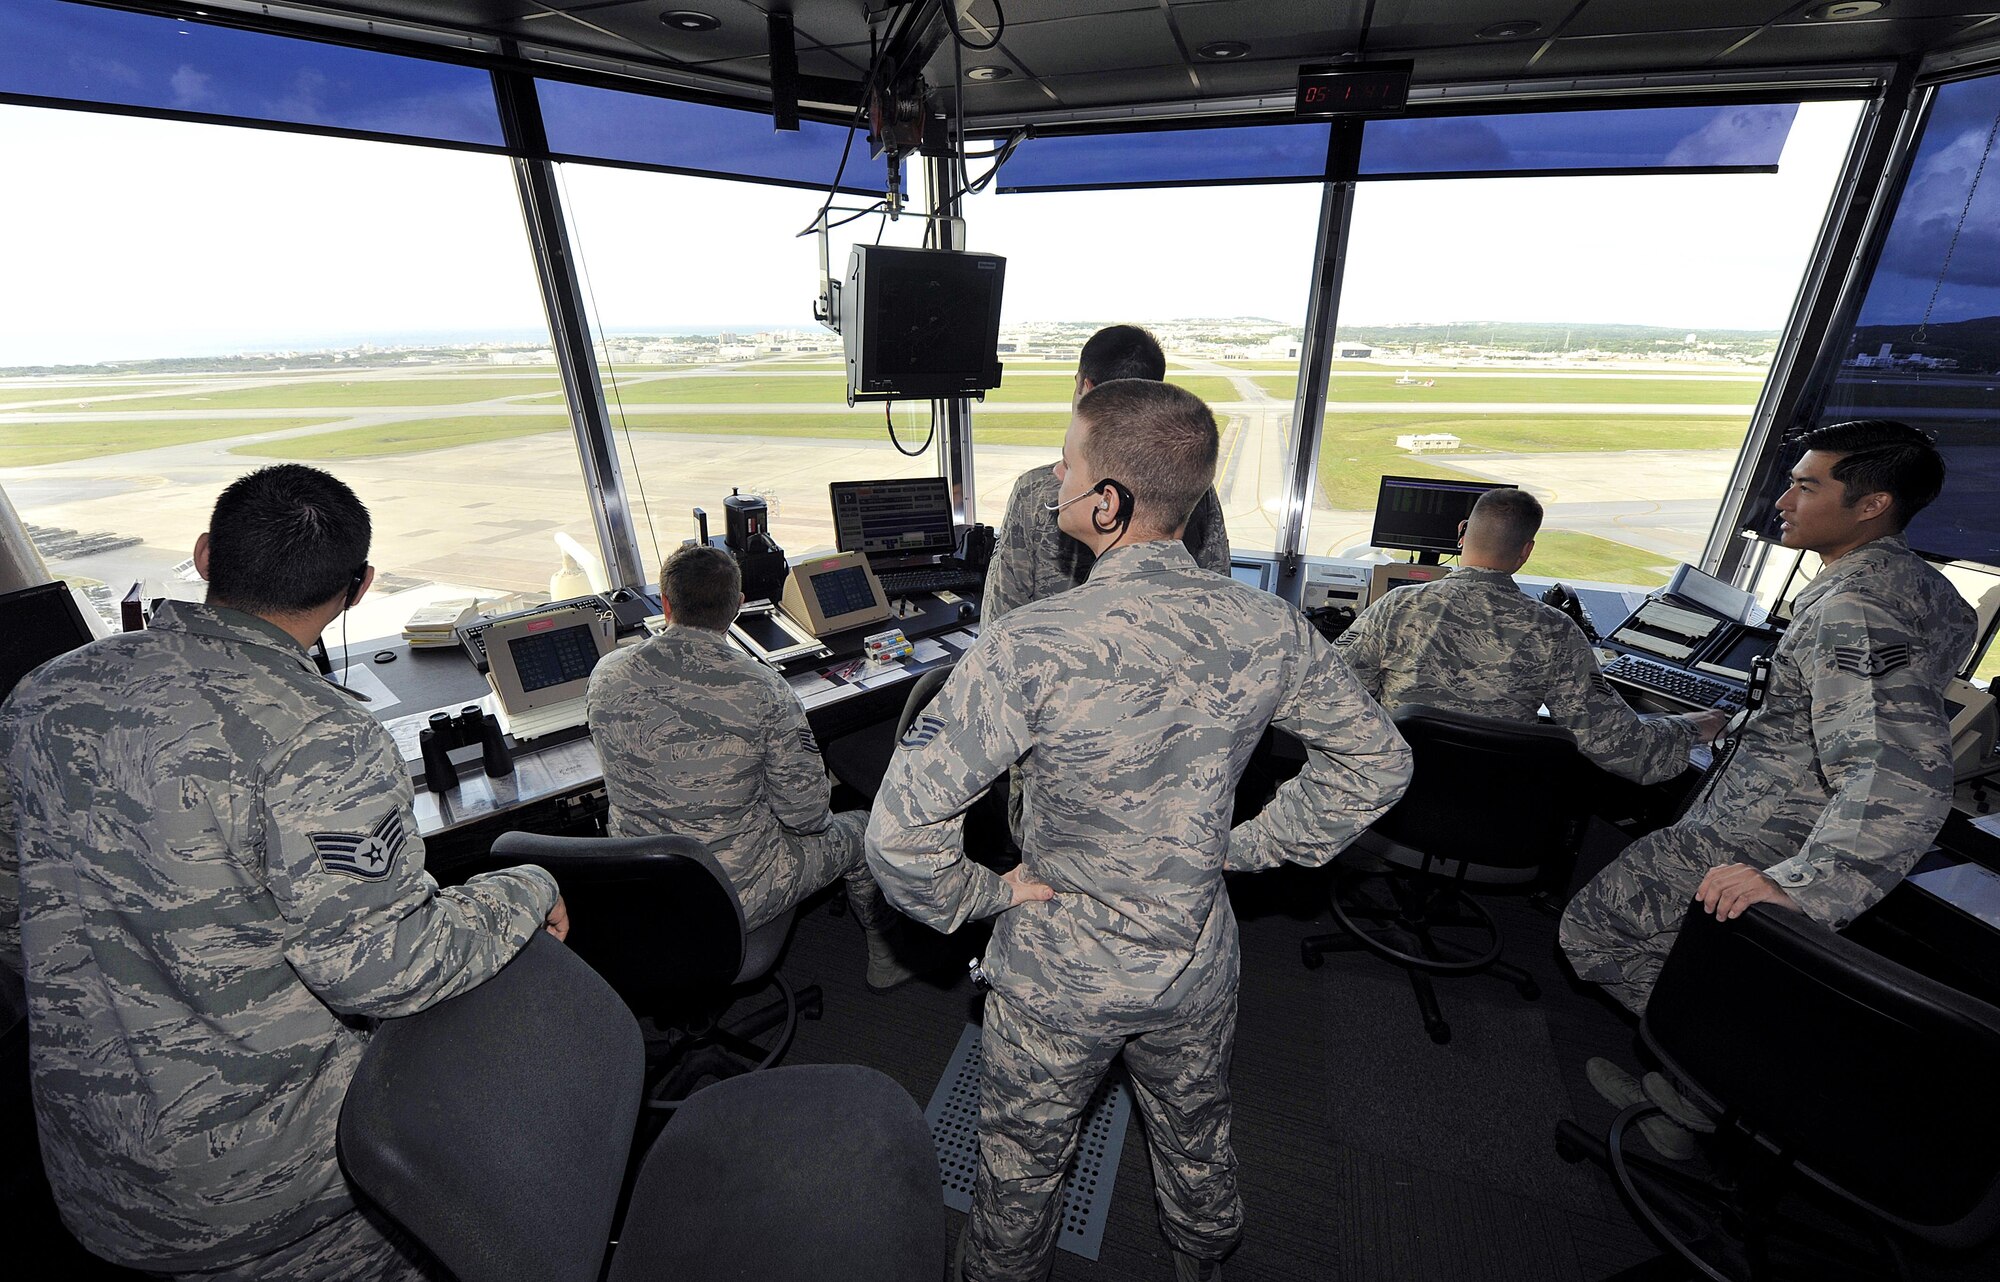 Air traffic controllers from the 18th Operations Support Squadron visually scan the Kadena flight line for safety risks in the ATC tower, Nov. 30, 2015, at Kadena Air Base, Japan. Air traffic controllers require extensive training so they can ensure the safety of flight operations for multiple airframes while minimizing delays. (U.S. Air Force photo by Naoto Anazawa/Released)